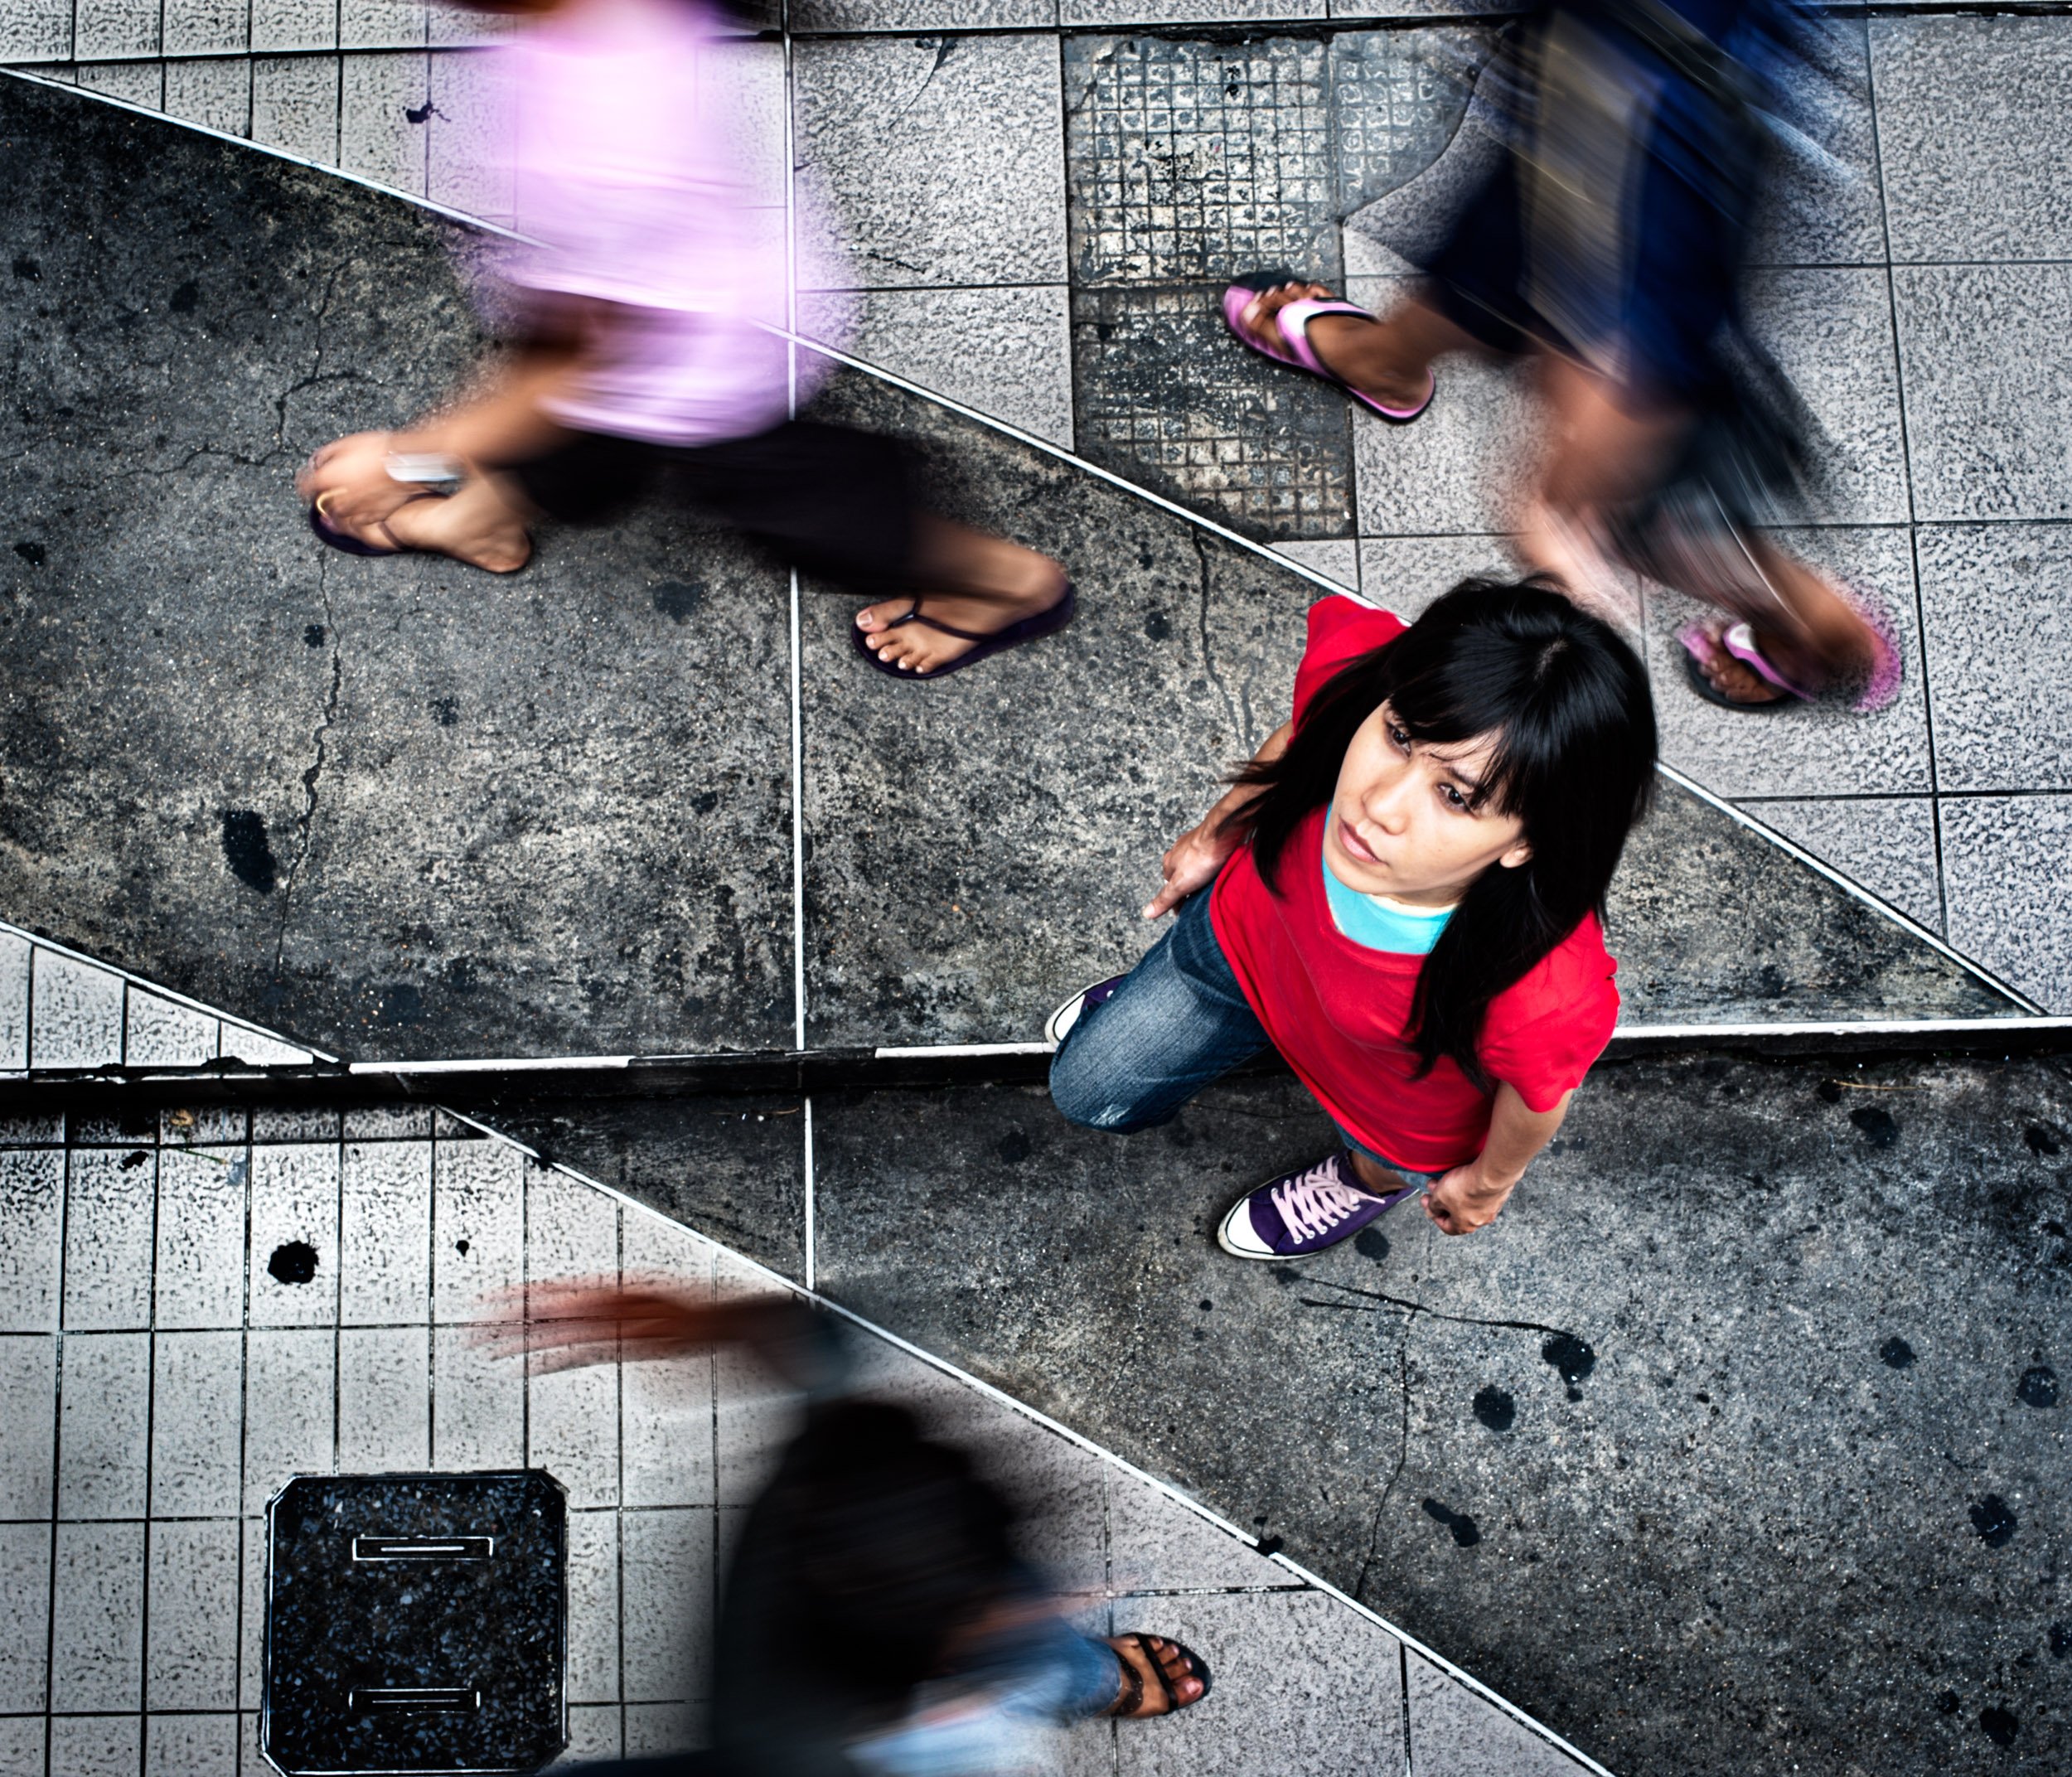 Looking down on an Asian young woman standing on a sidewalk.